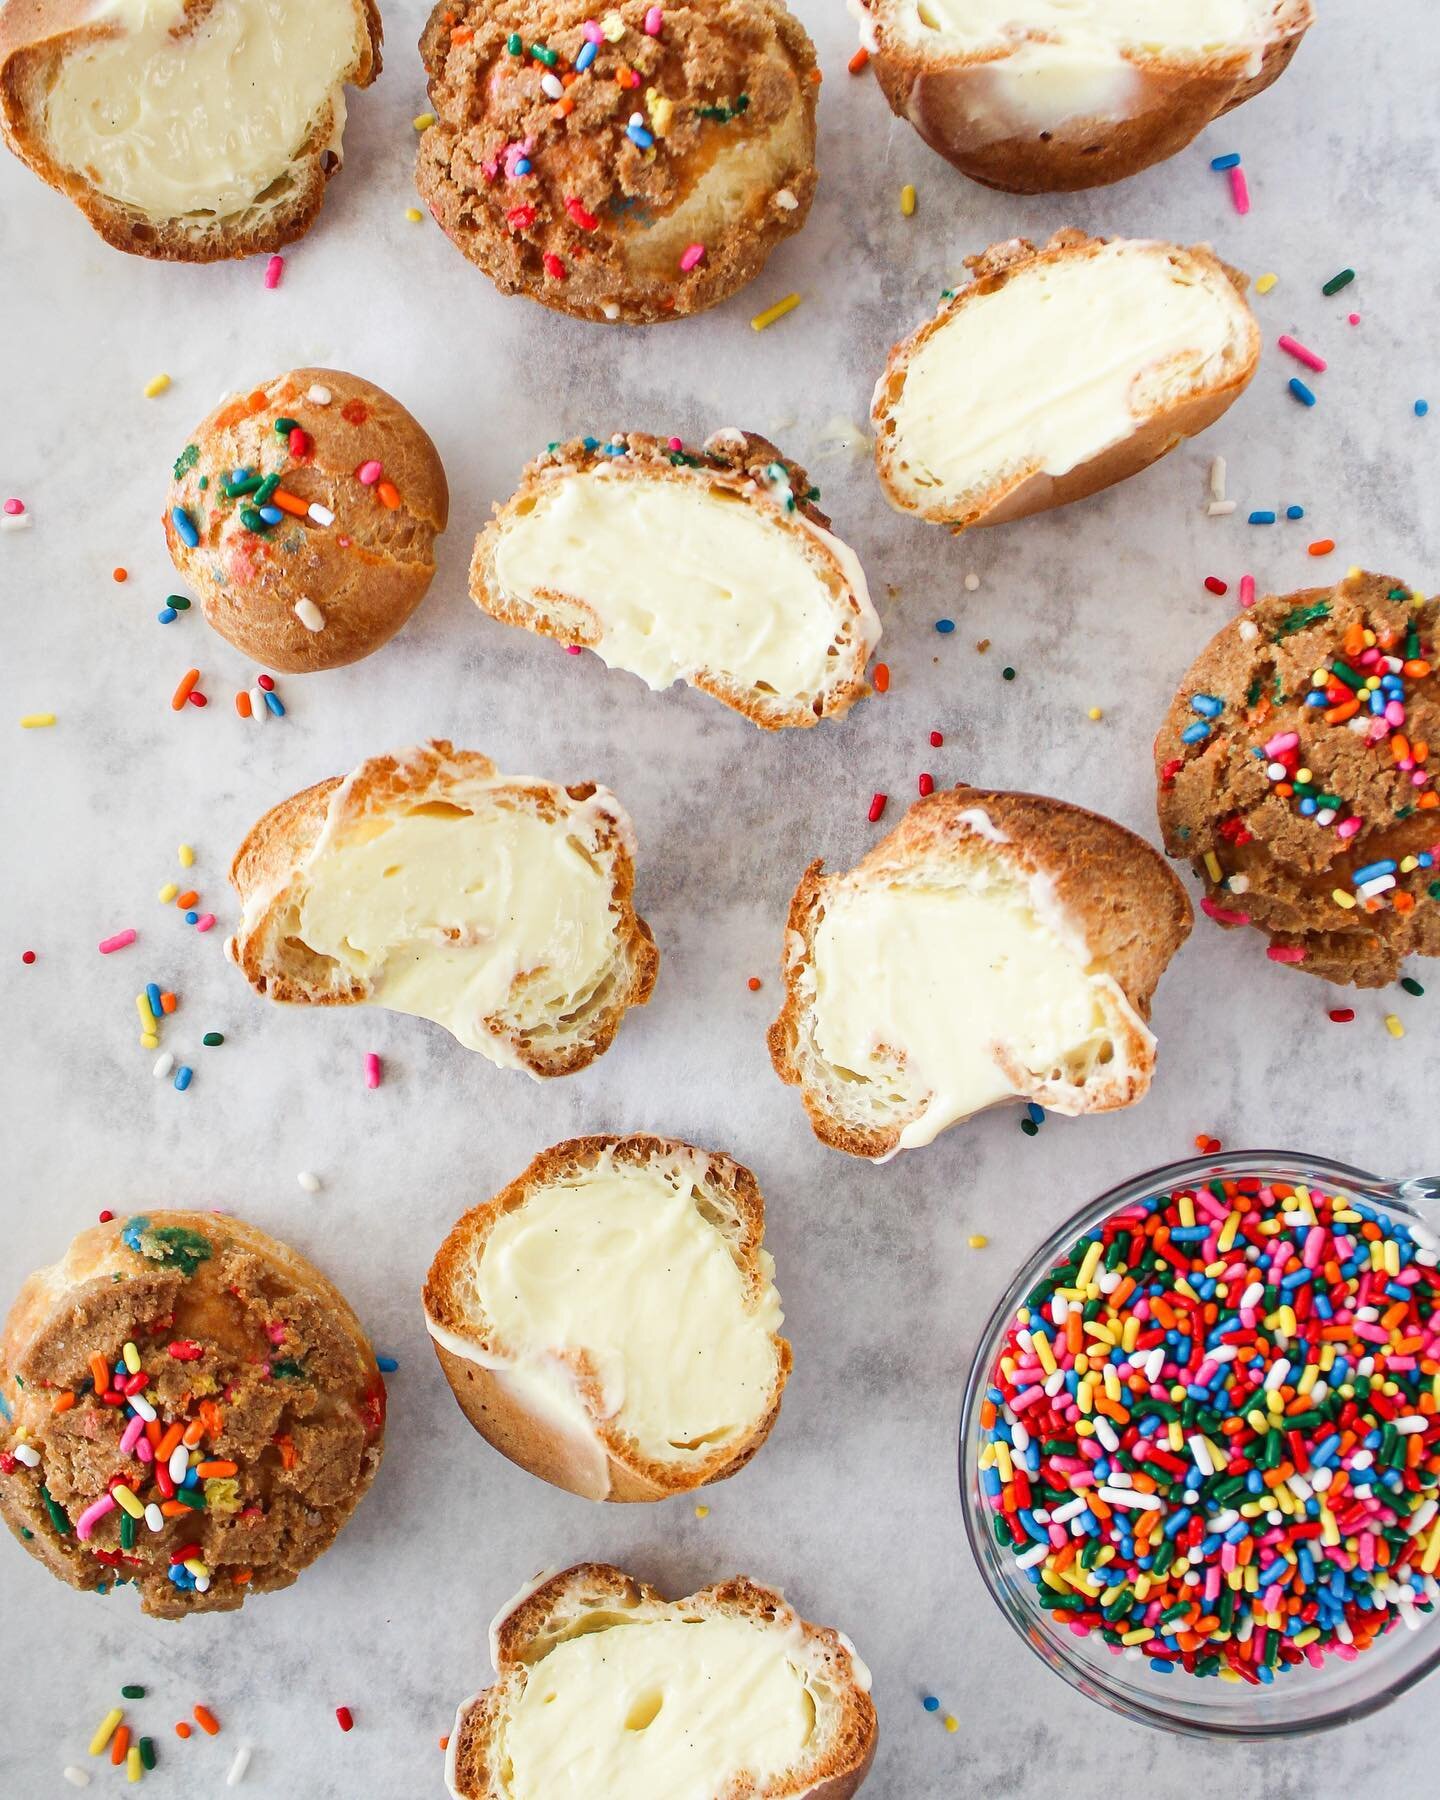 Sometimes you come home from work after a long day and decide you NEED to make some Funfetti Cream puffs? Just me?  Hmm okay 😂
&bull;
I adapted this recipe from @csaffitz new book! Go buy this book and make them!!!
&bull;
#funfetti #cake #sprinkles 